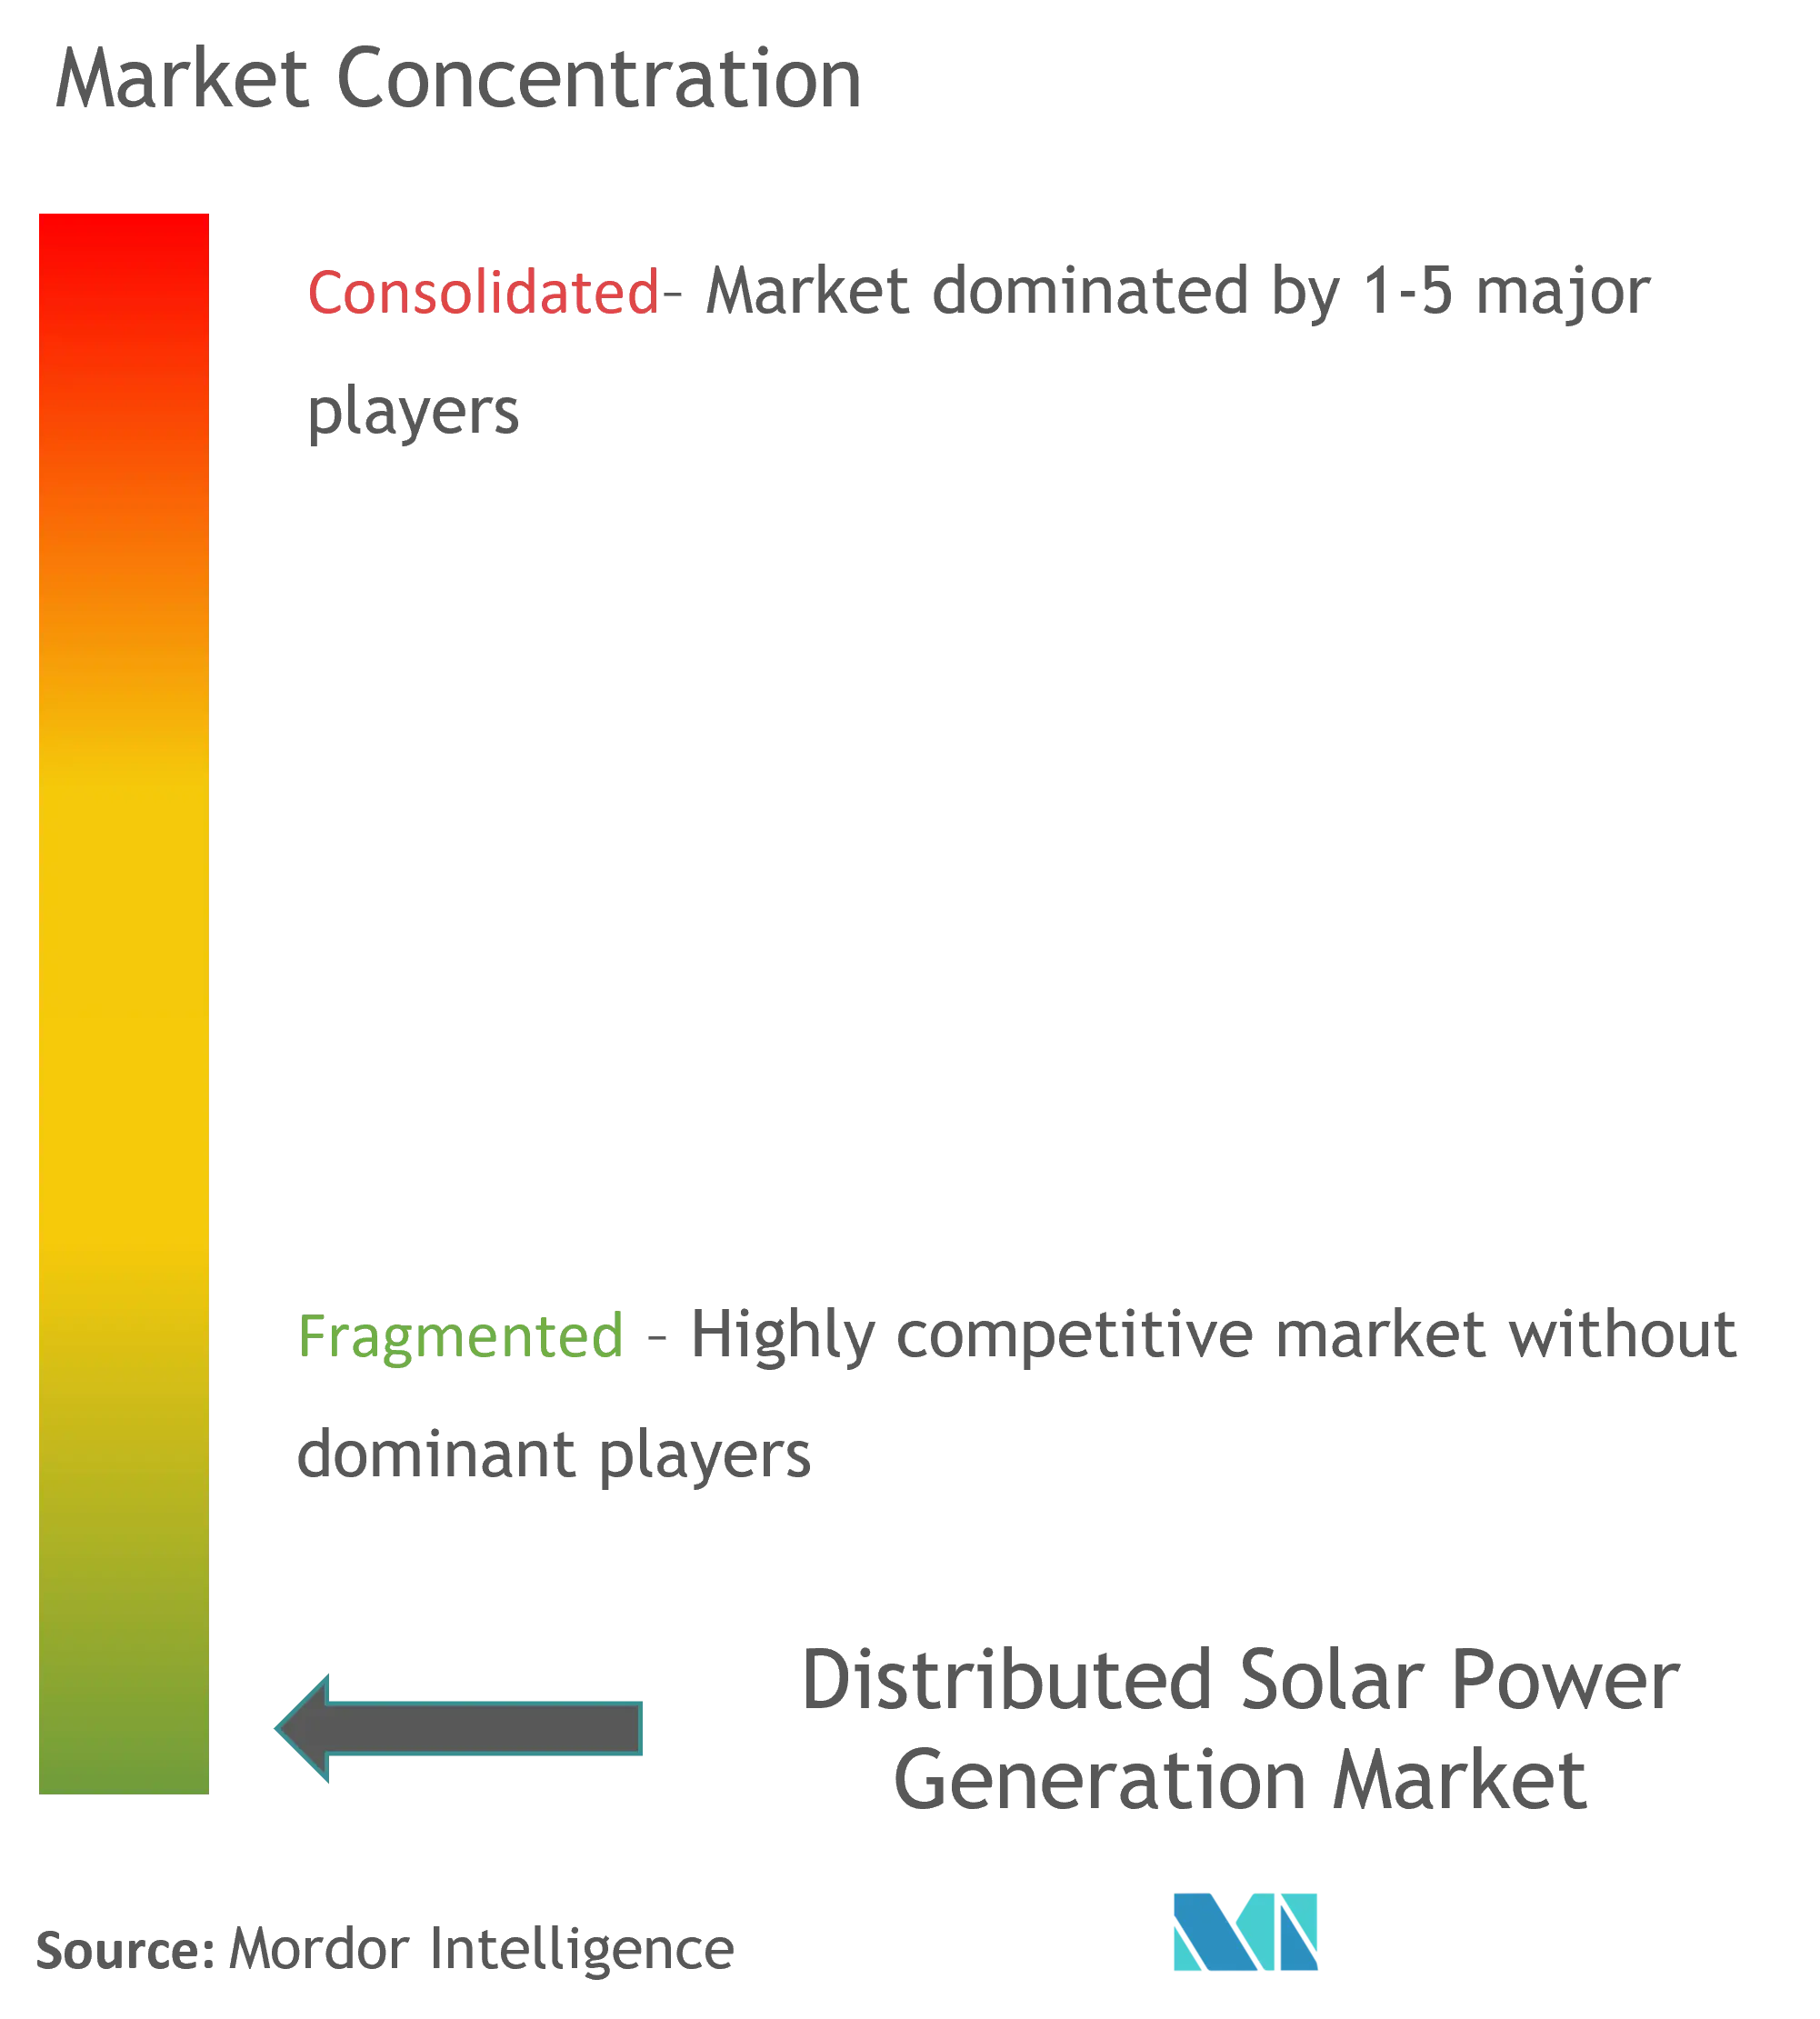 Distributed Solar Power Generation Market Concentration